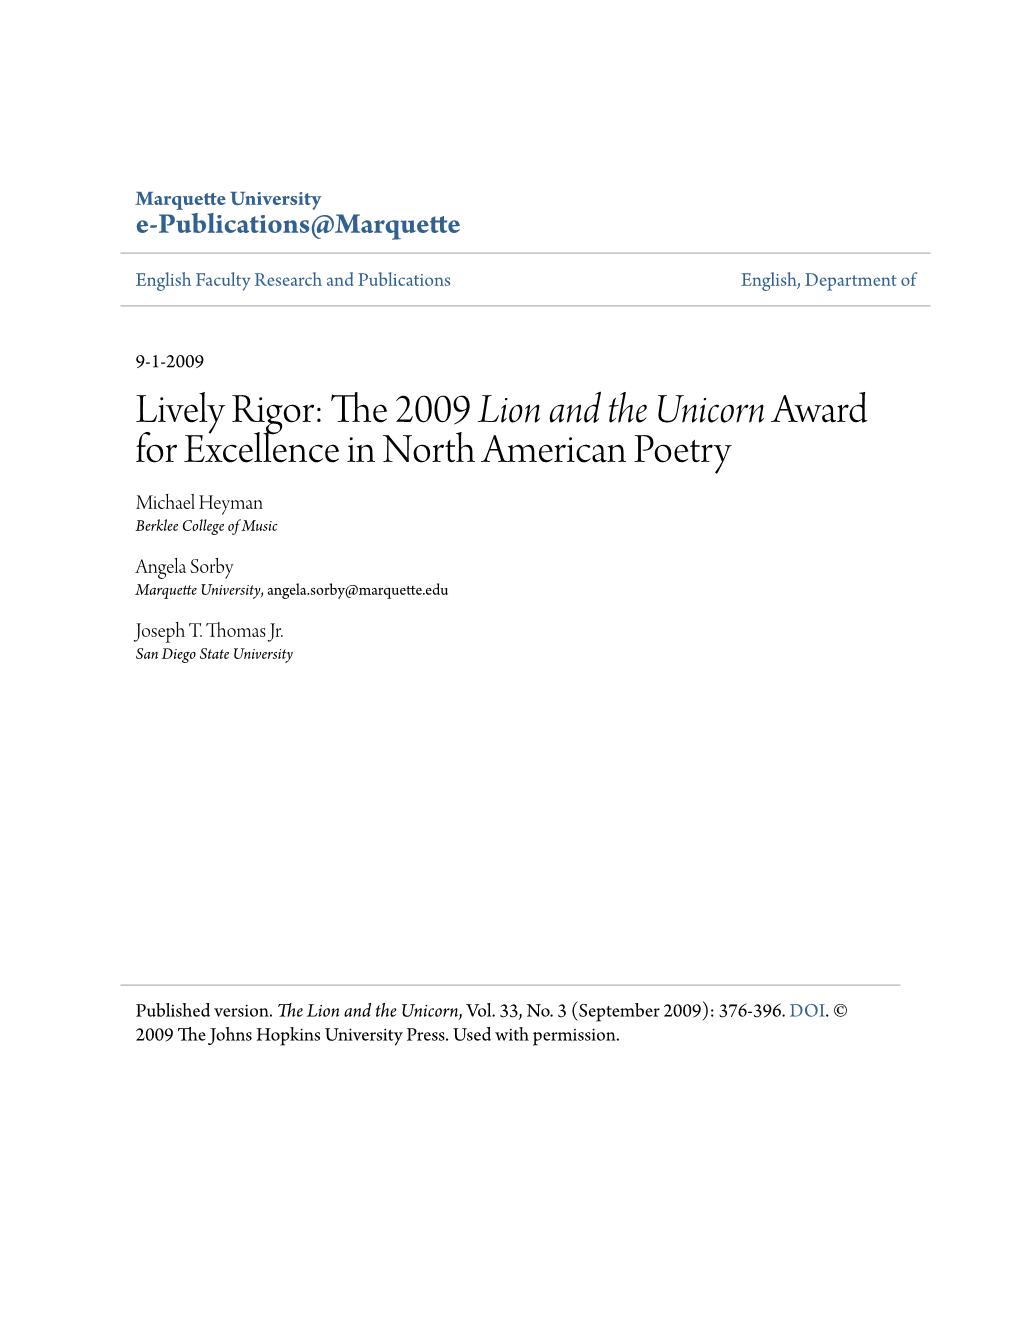 The 2009 Lion and the Unicorn Award for Excellence in North American Poetry Michael Heyman Berklee College of Music